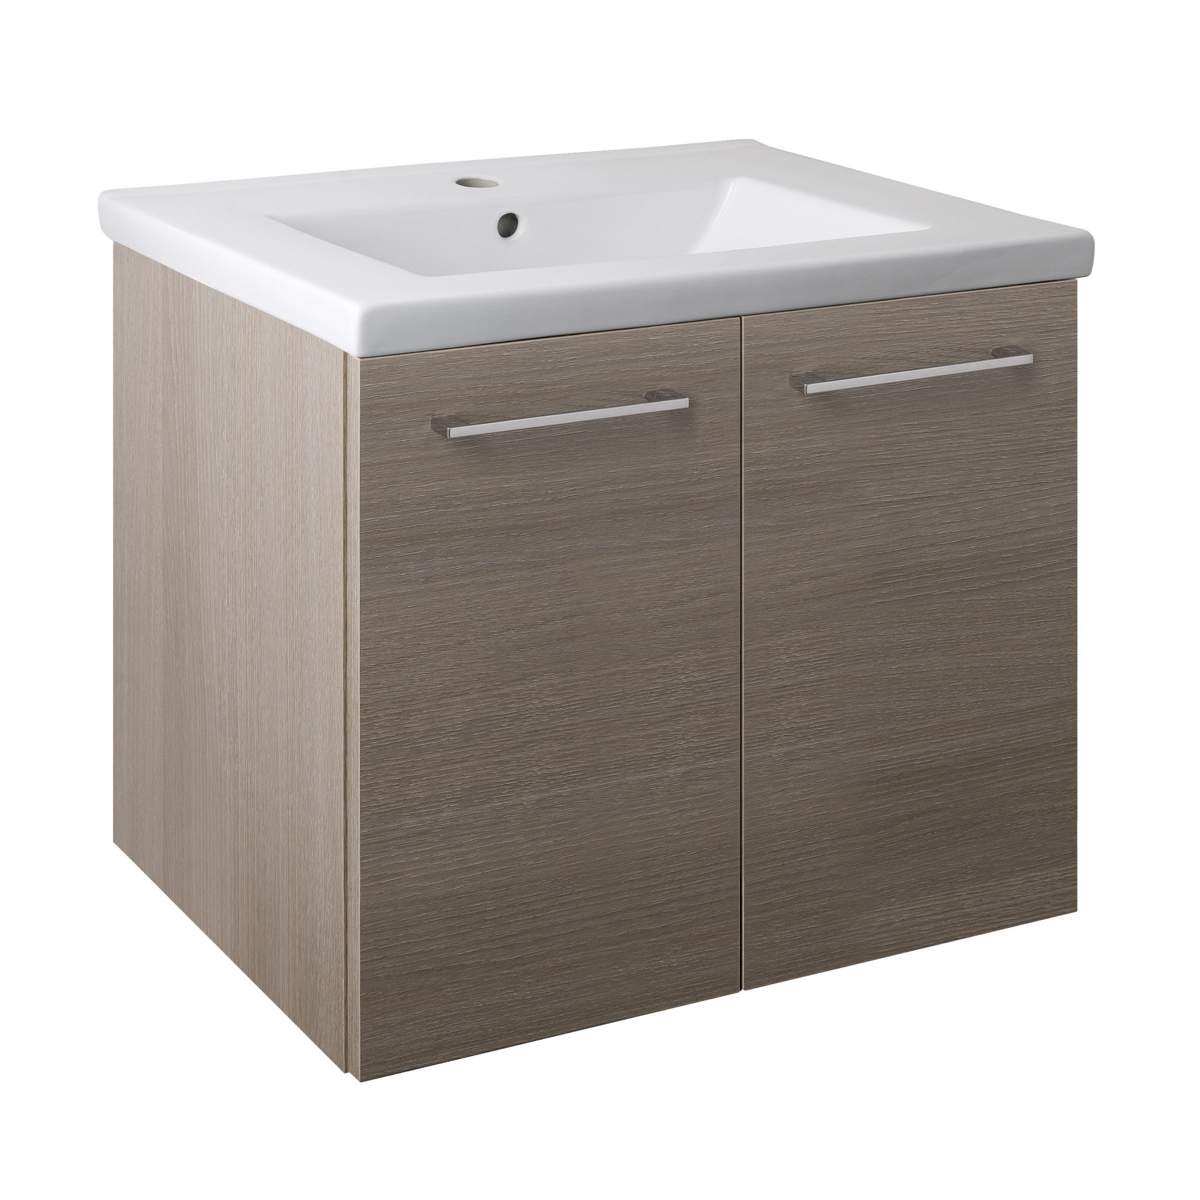 JTP Pace Units 600mm Wall Mounted Unit with Doors and Basin in Grey